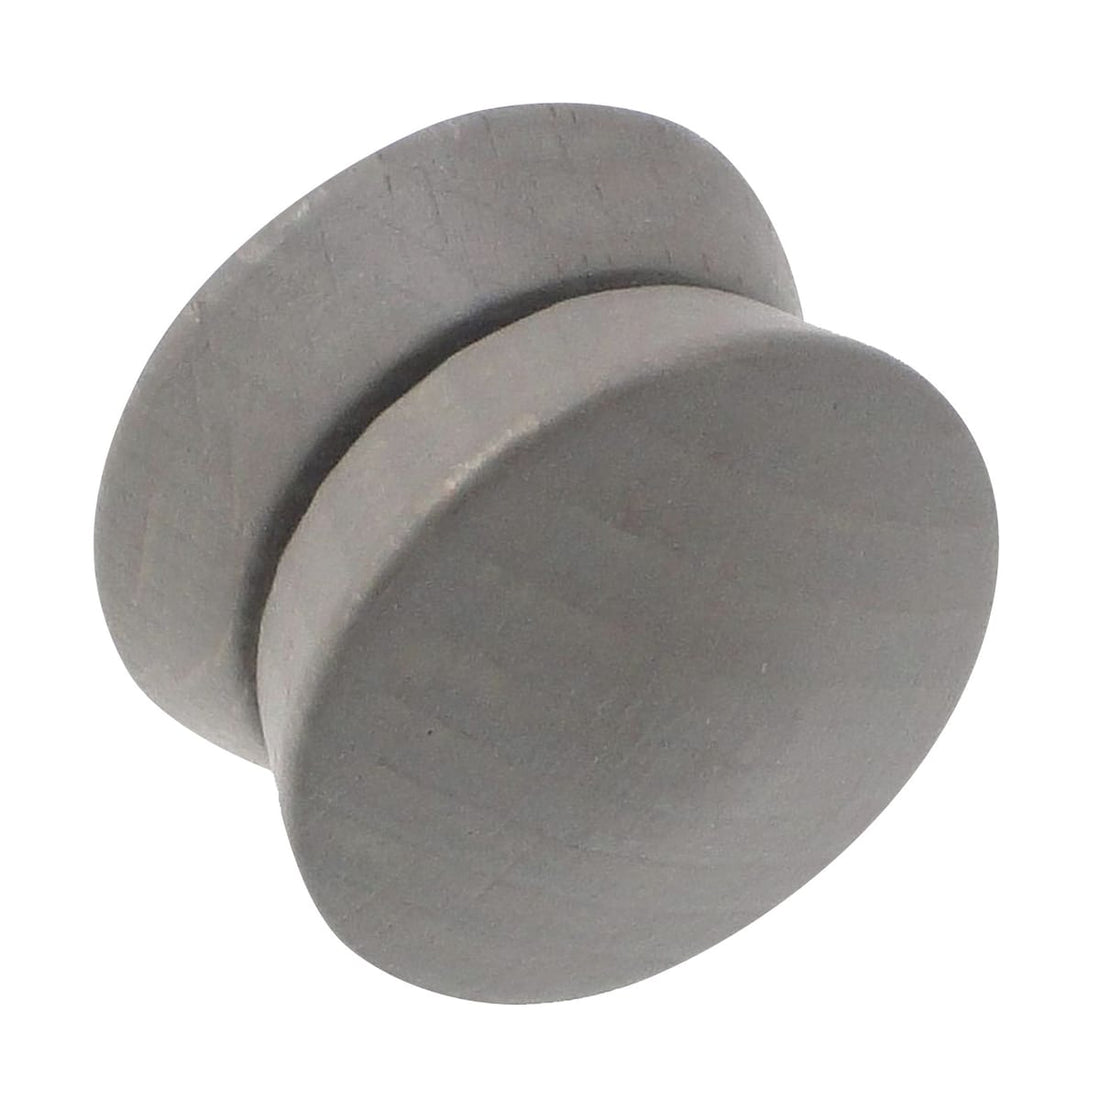 MAGNETIC BUTTONS WOOD 32 MM GREY 2 PIECES